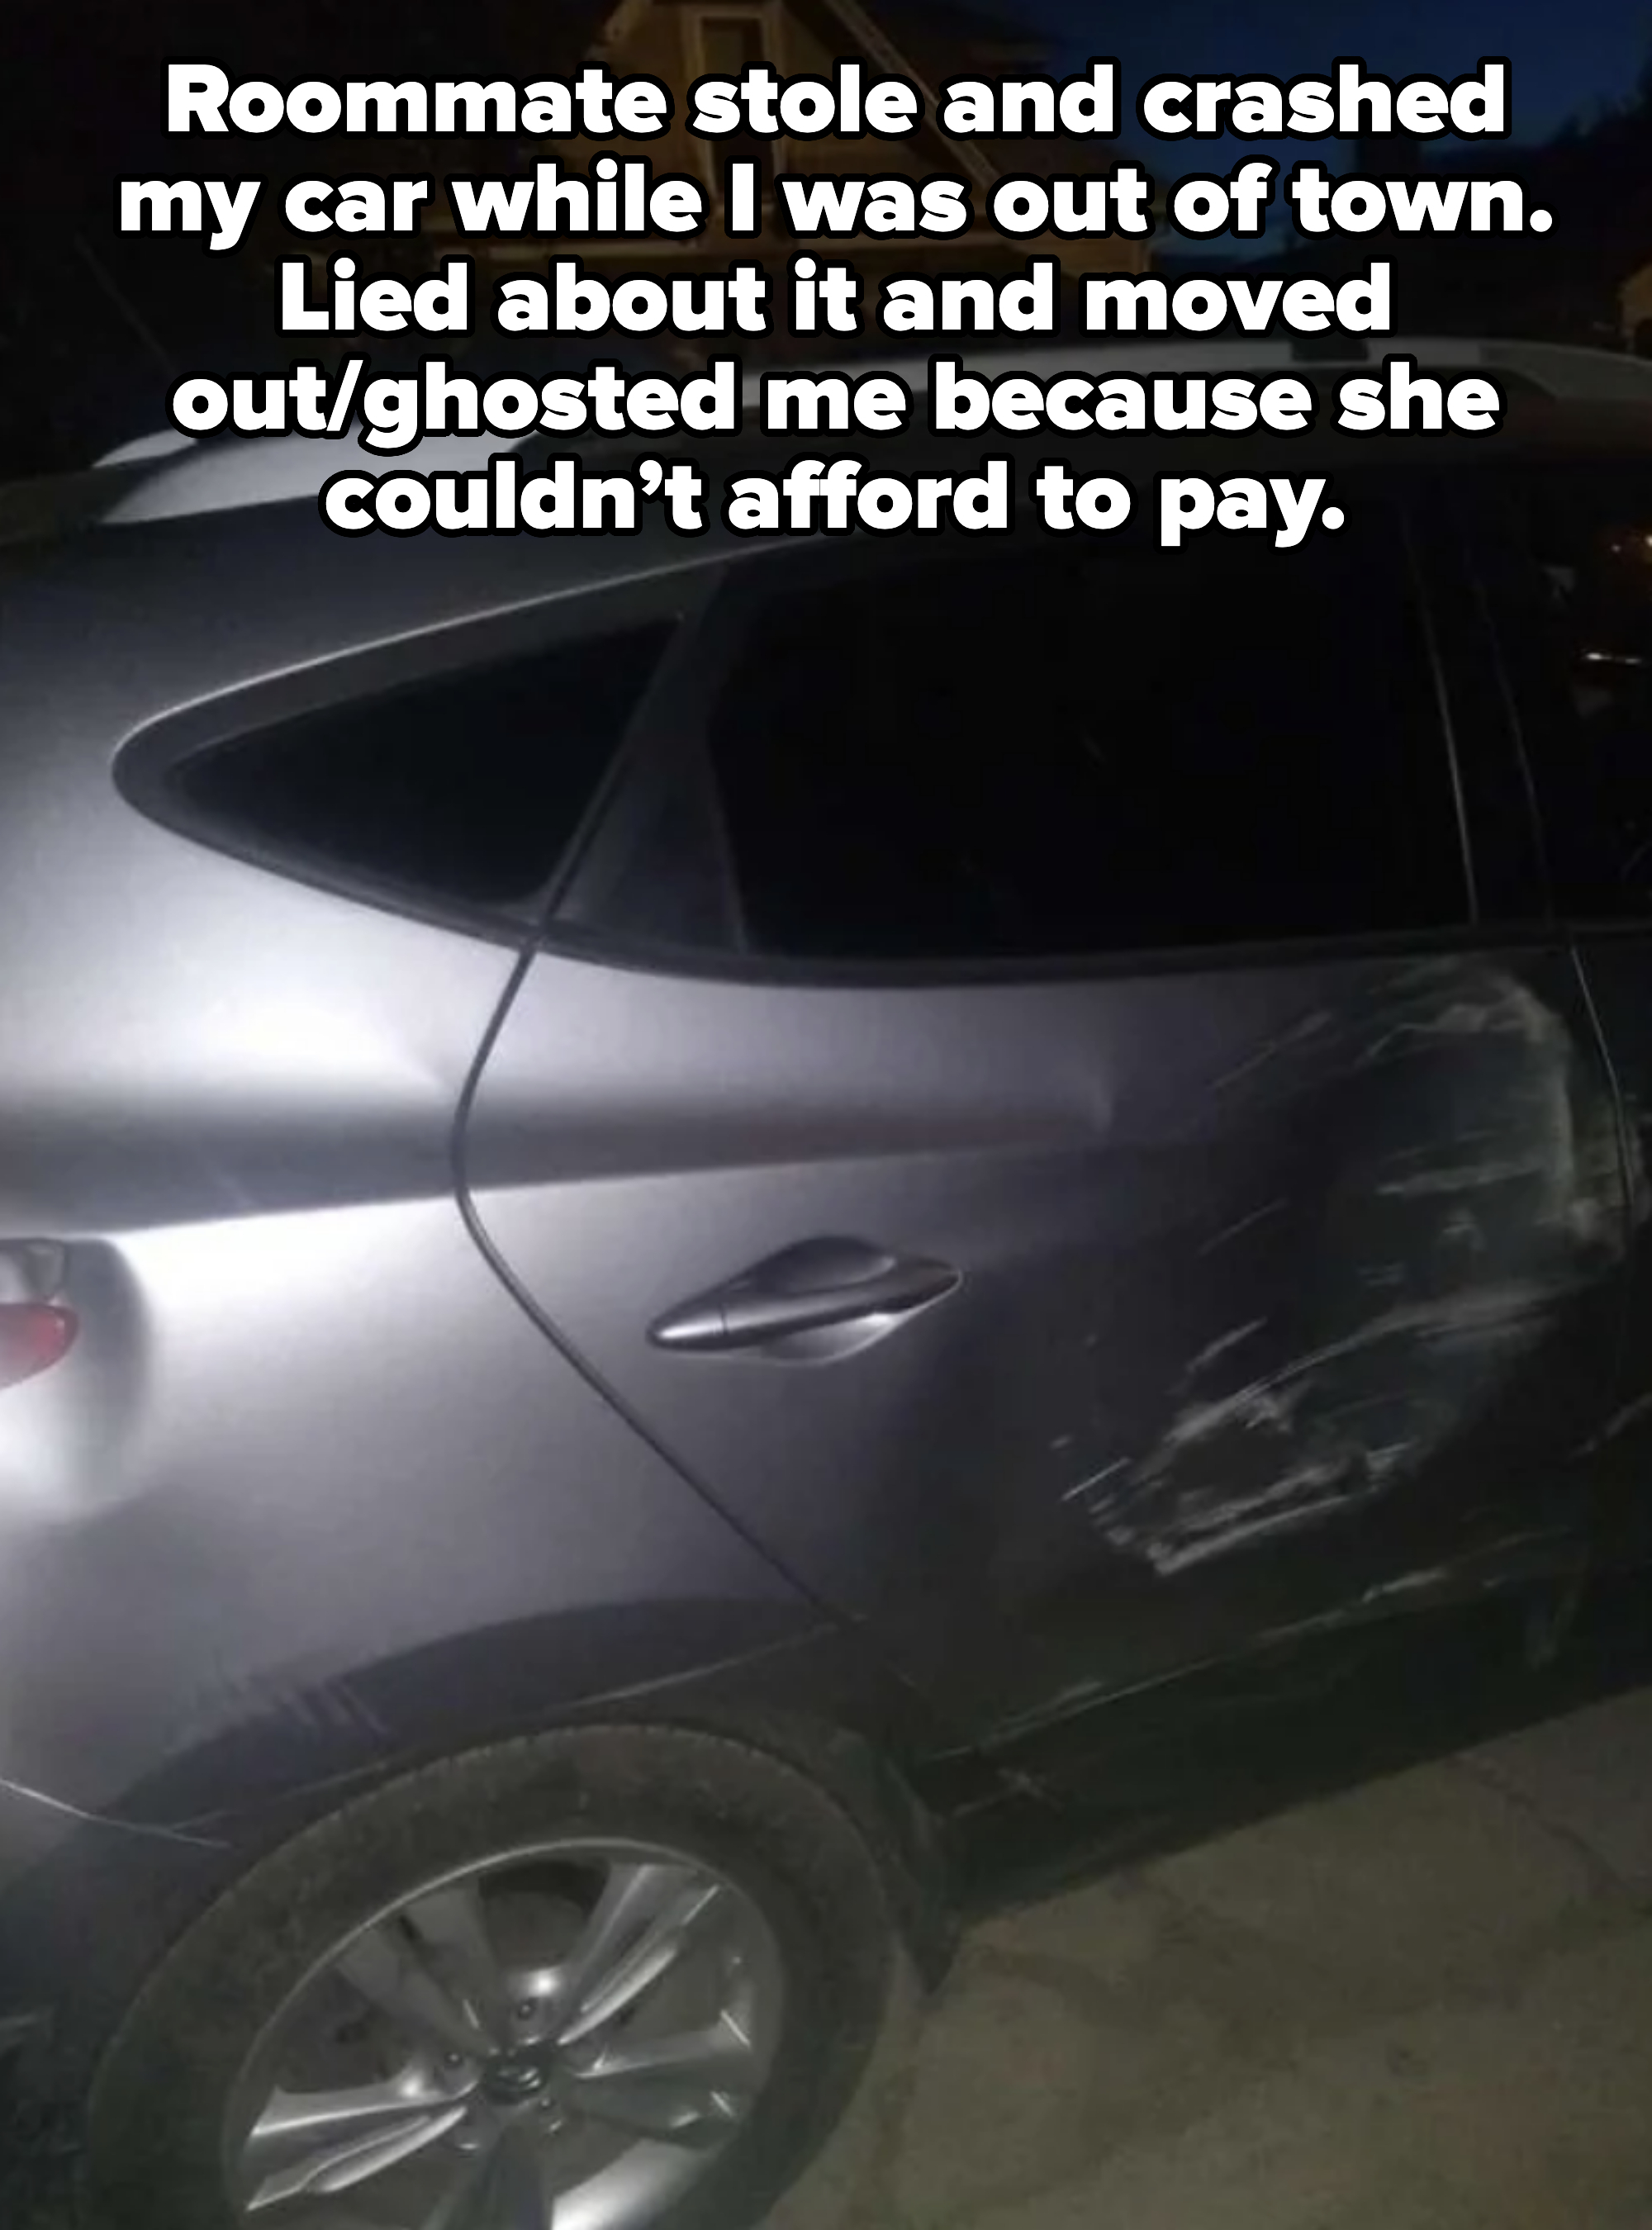 roommate stole and crashed their roommate&#x27;s car